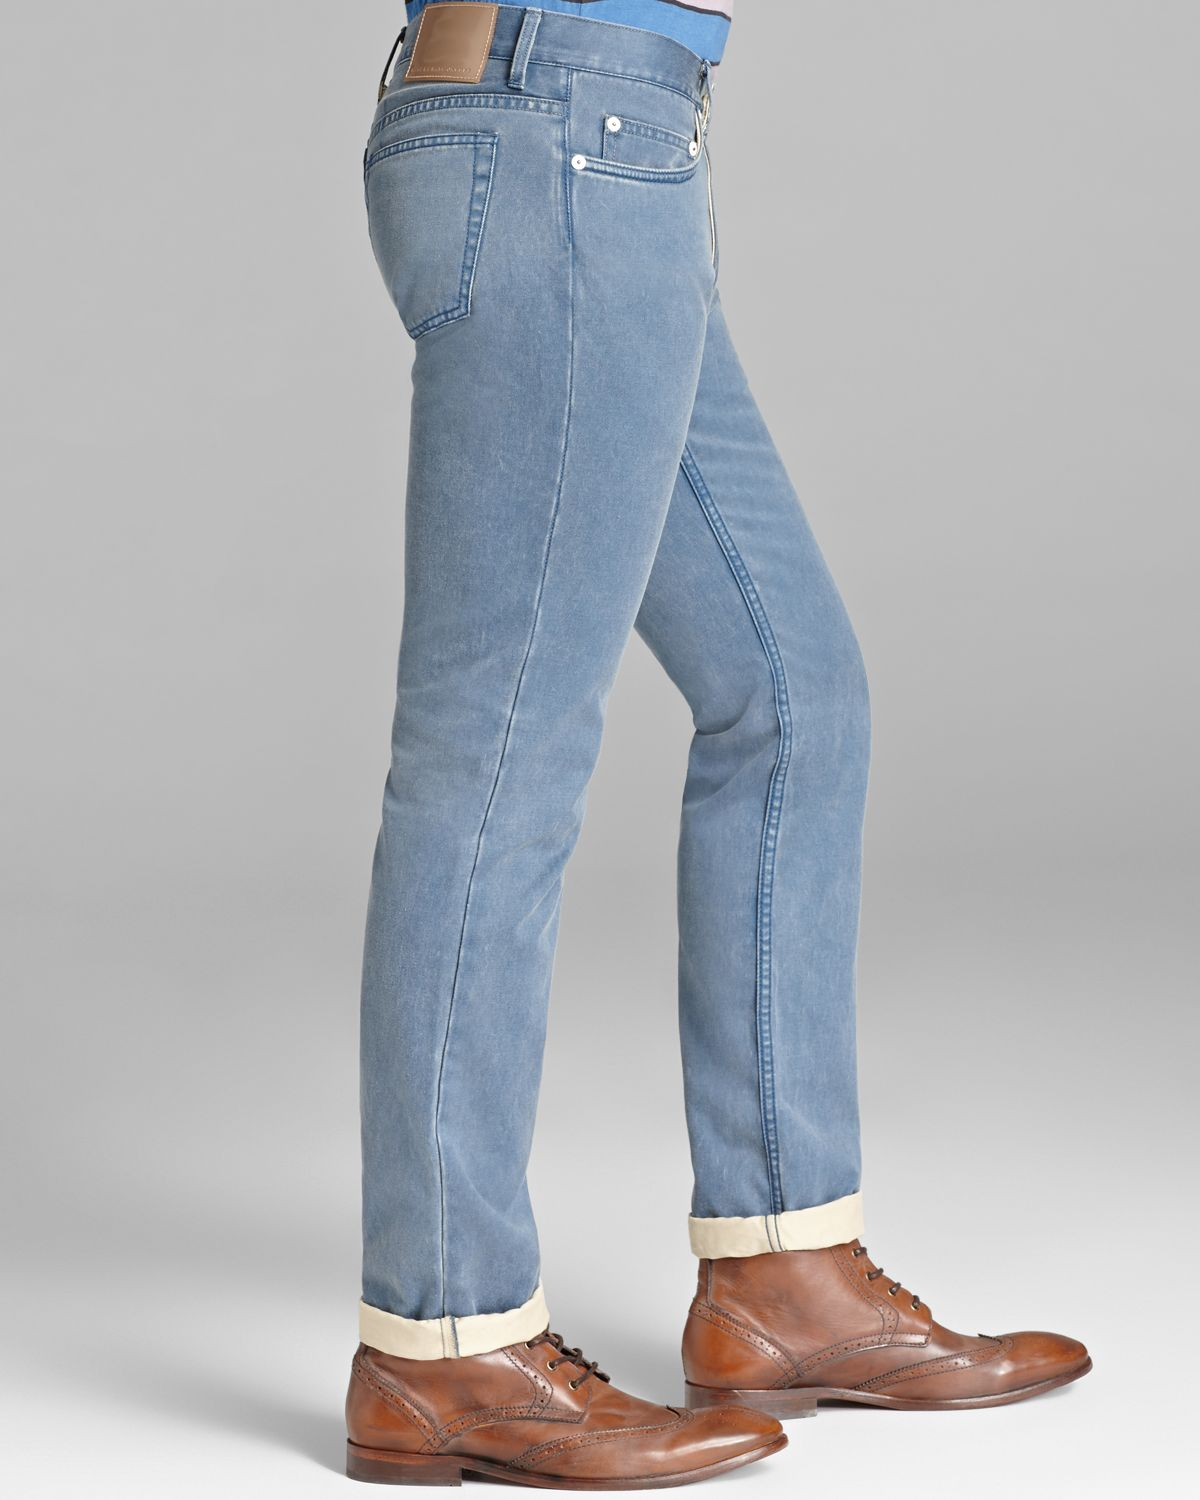 Mark By Mark Jacobs Jeans For Men 64